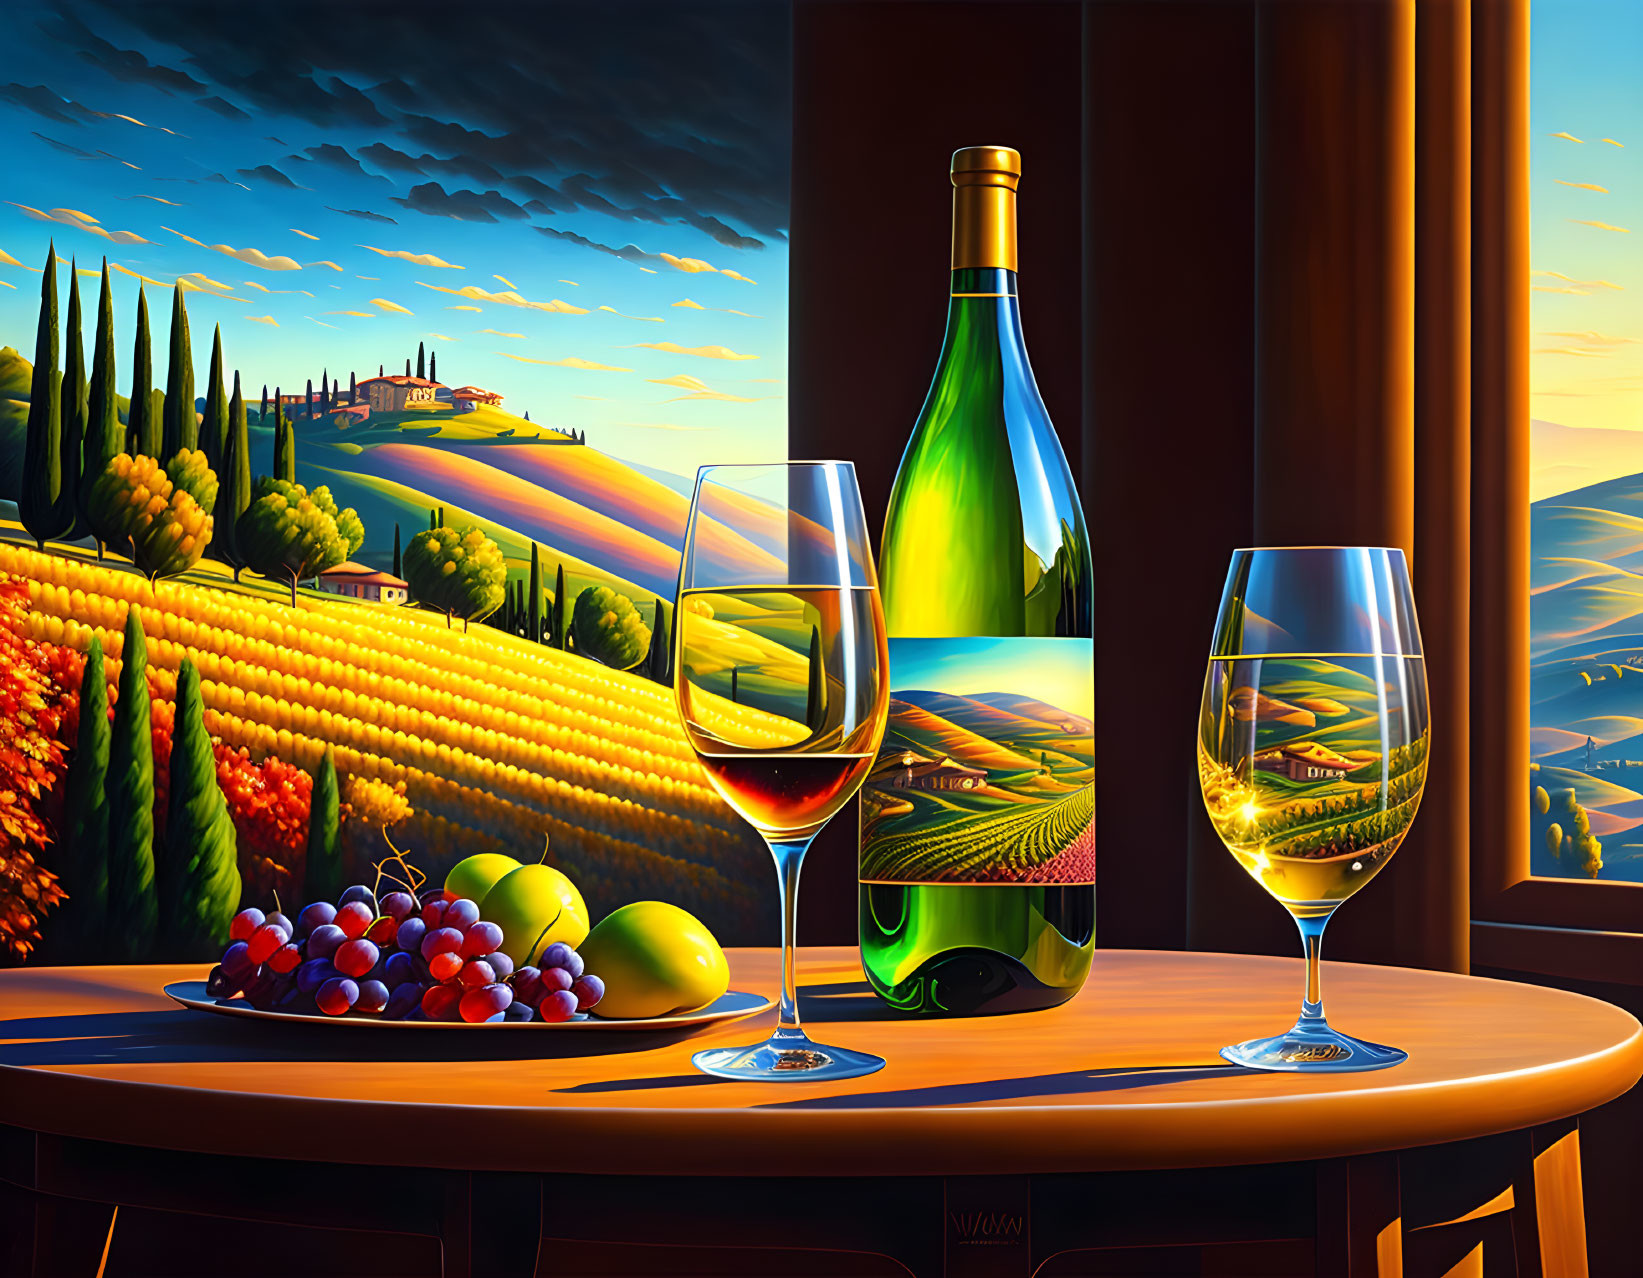 Colorful still-life painting of wine bottle, glasses, grapes on wooden table, Tuscan landscape.